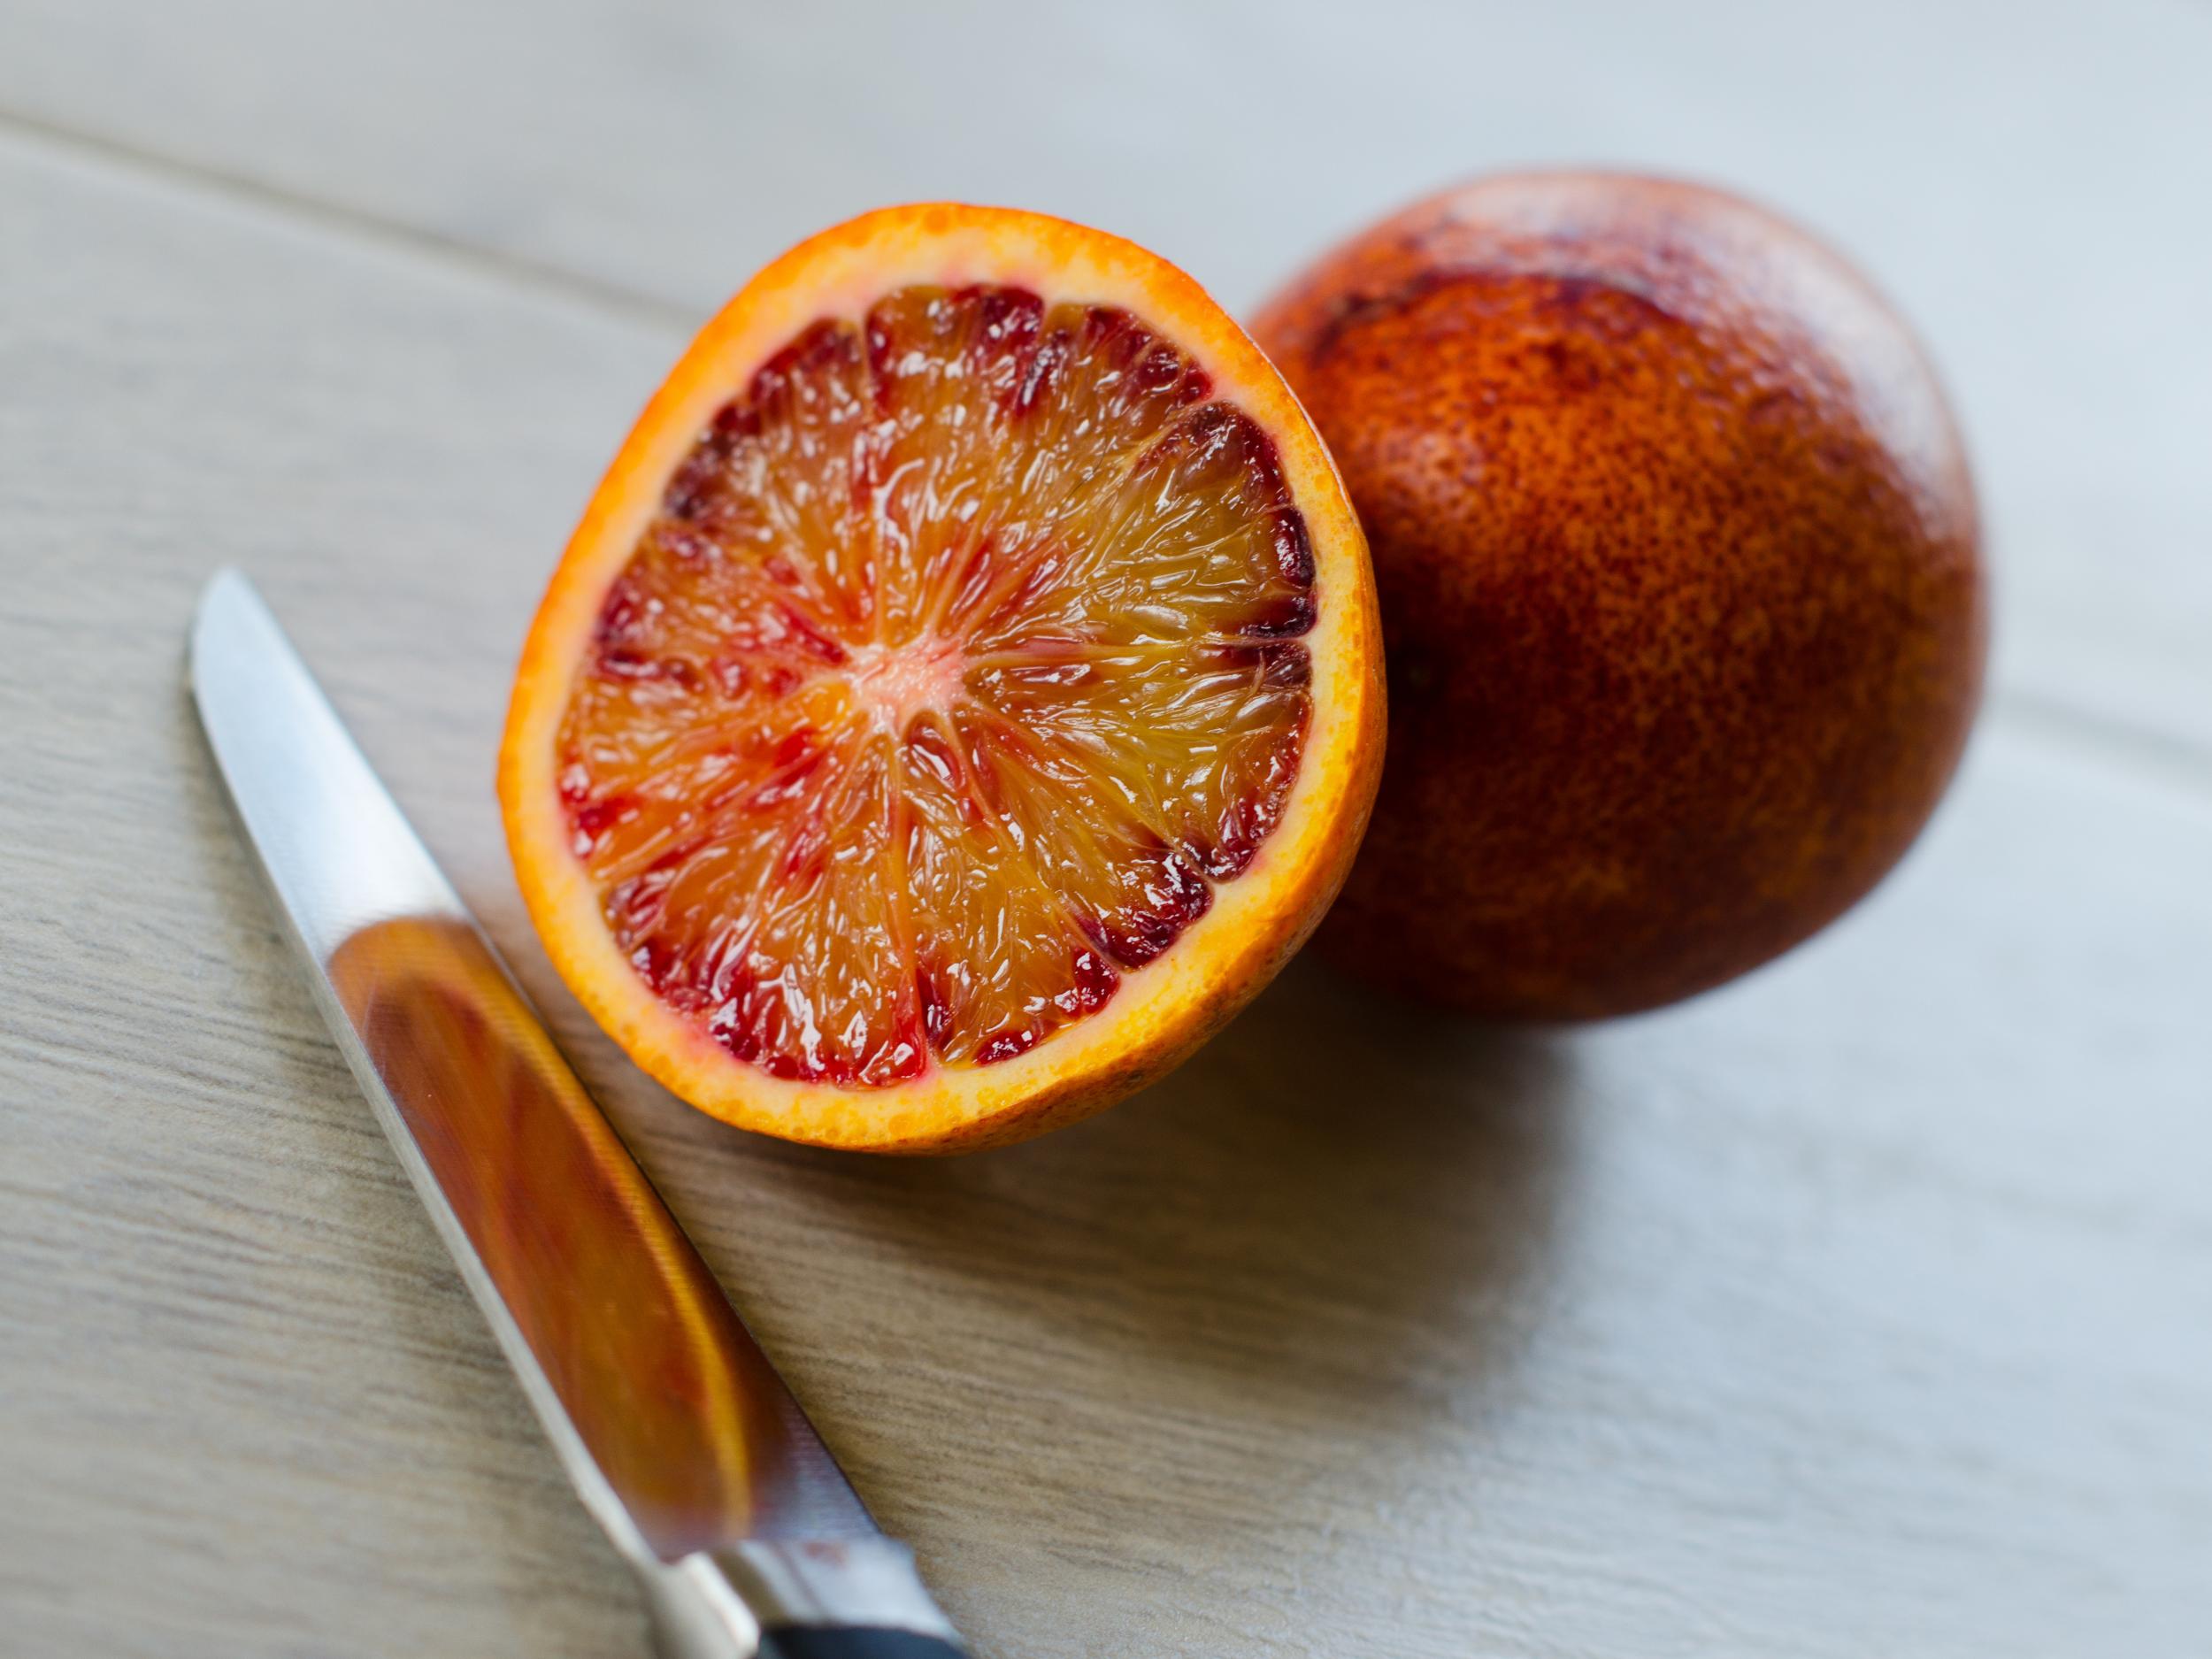 Flesh and blood: the fruit’s dark red colour comes from antioxidant pigments which are uncommon in the citrus family